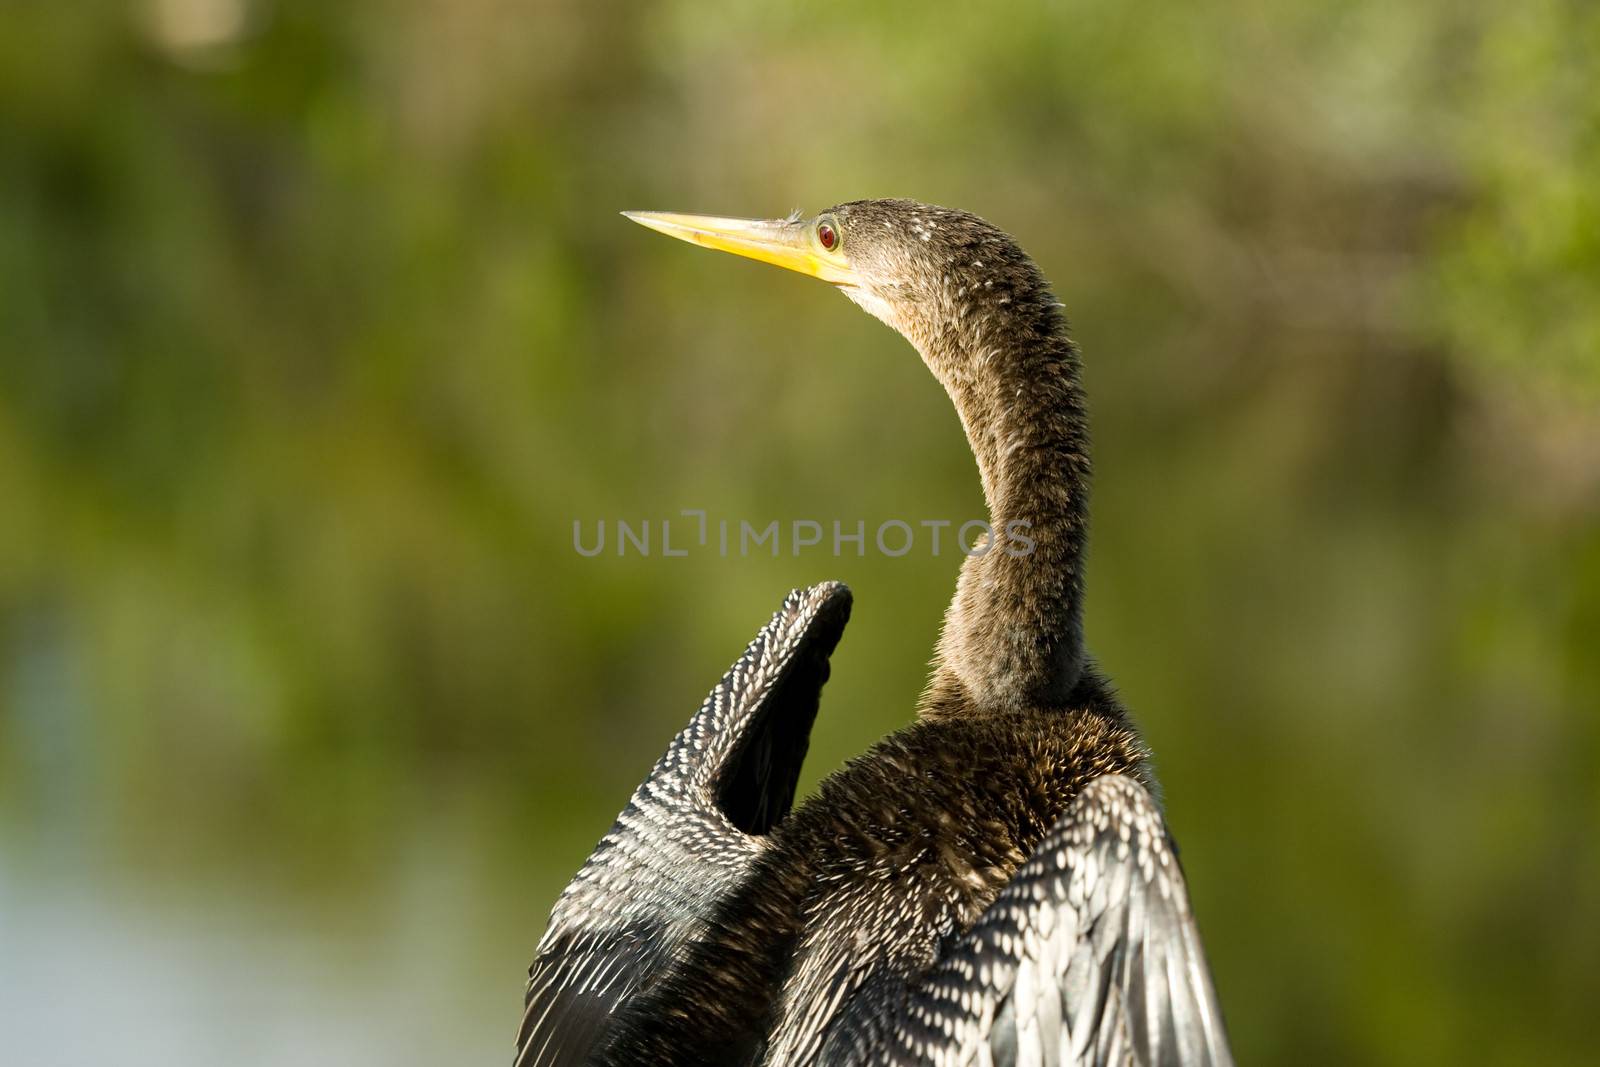 Portrait of bird in Florida Everglades with green nature background, U.S.A.